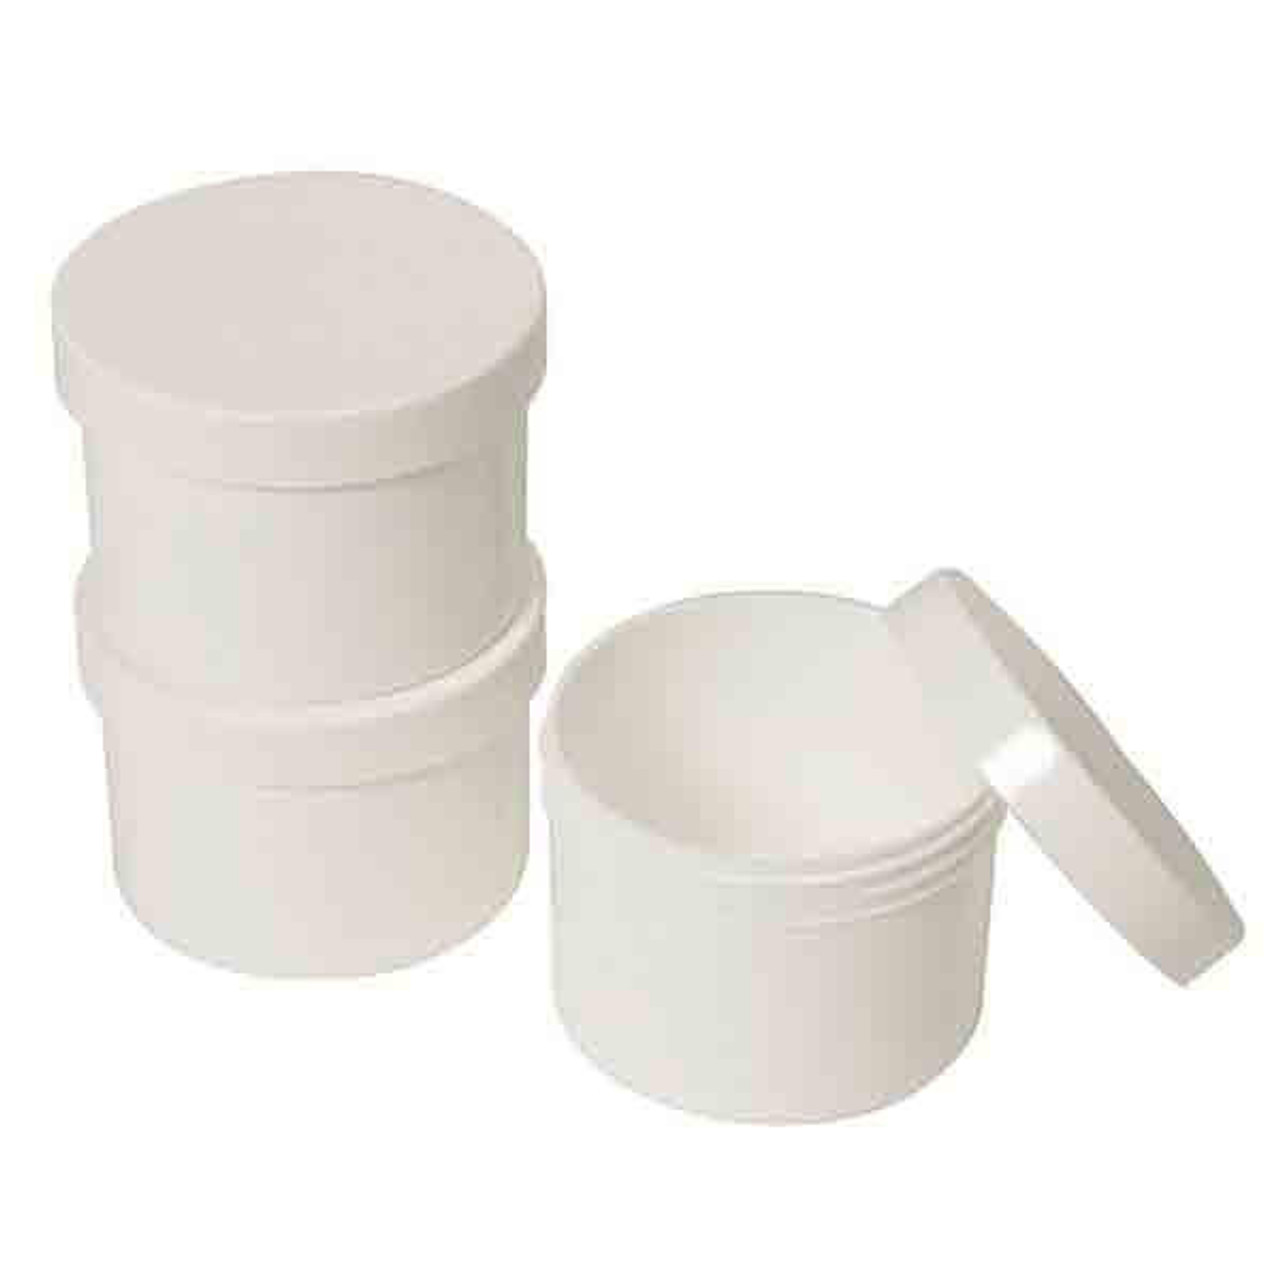 https://cdn11.bigcommerce.com/s-zgzol/images/stencil/1280x1280/products/9167/194997/global-gilson-gilson-sc-117-plastic-sample-containers-8oz-pkg-12__65231.1699920832.jpg?c=2